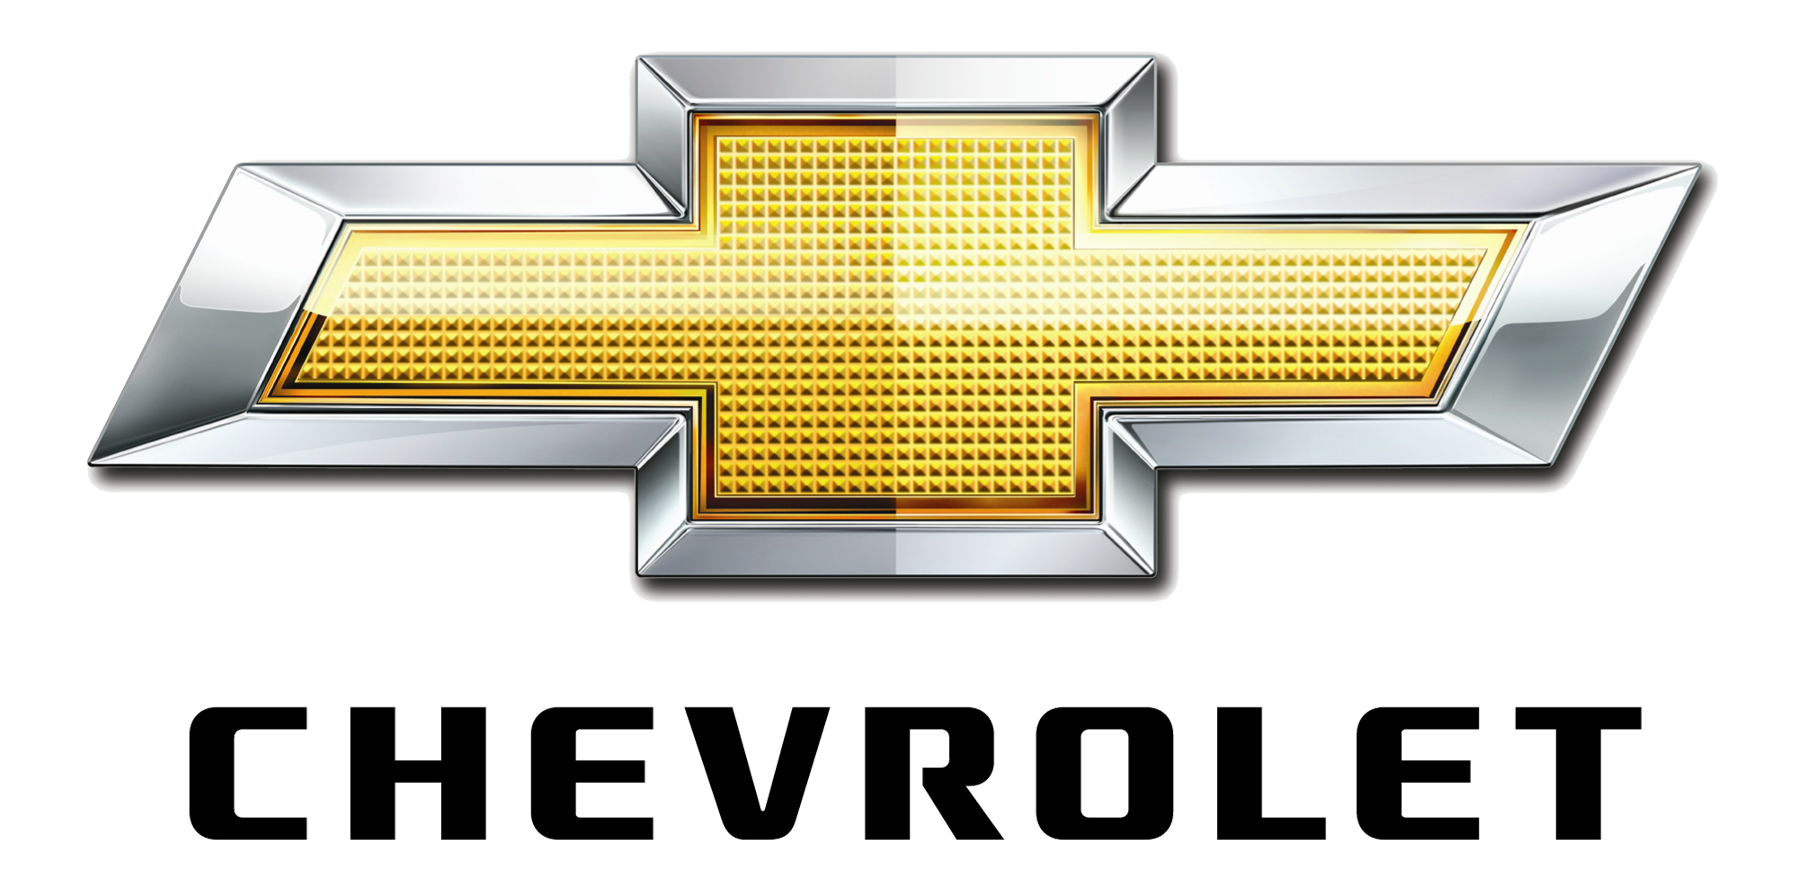 Download Chevrolet Logo PNG Image For Free